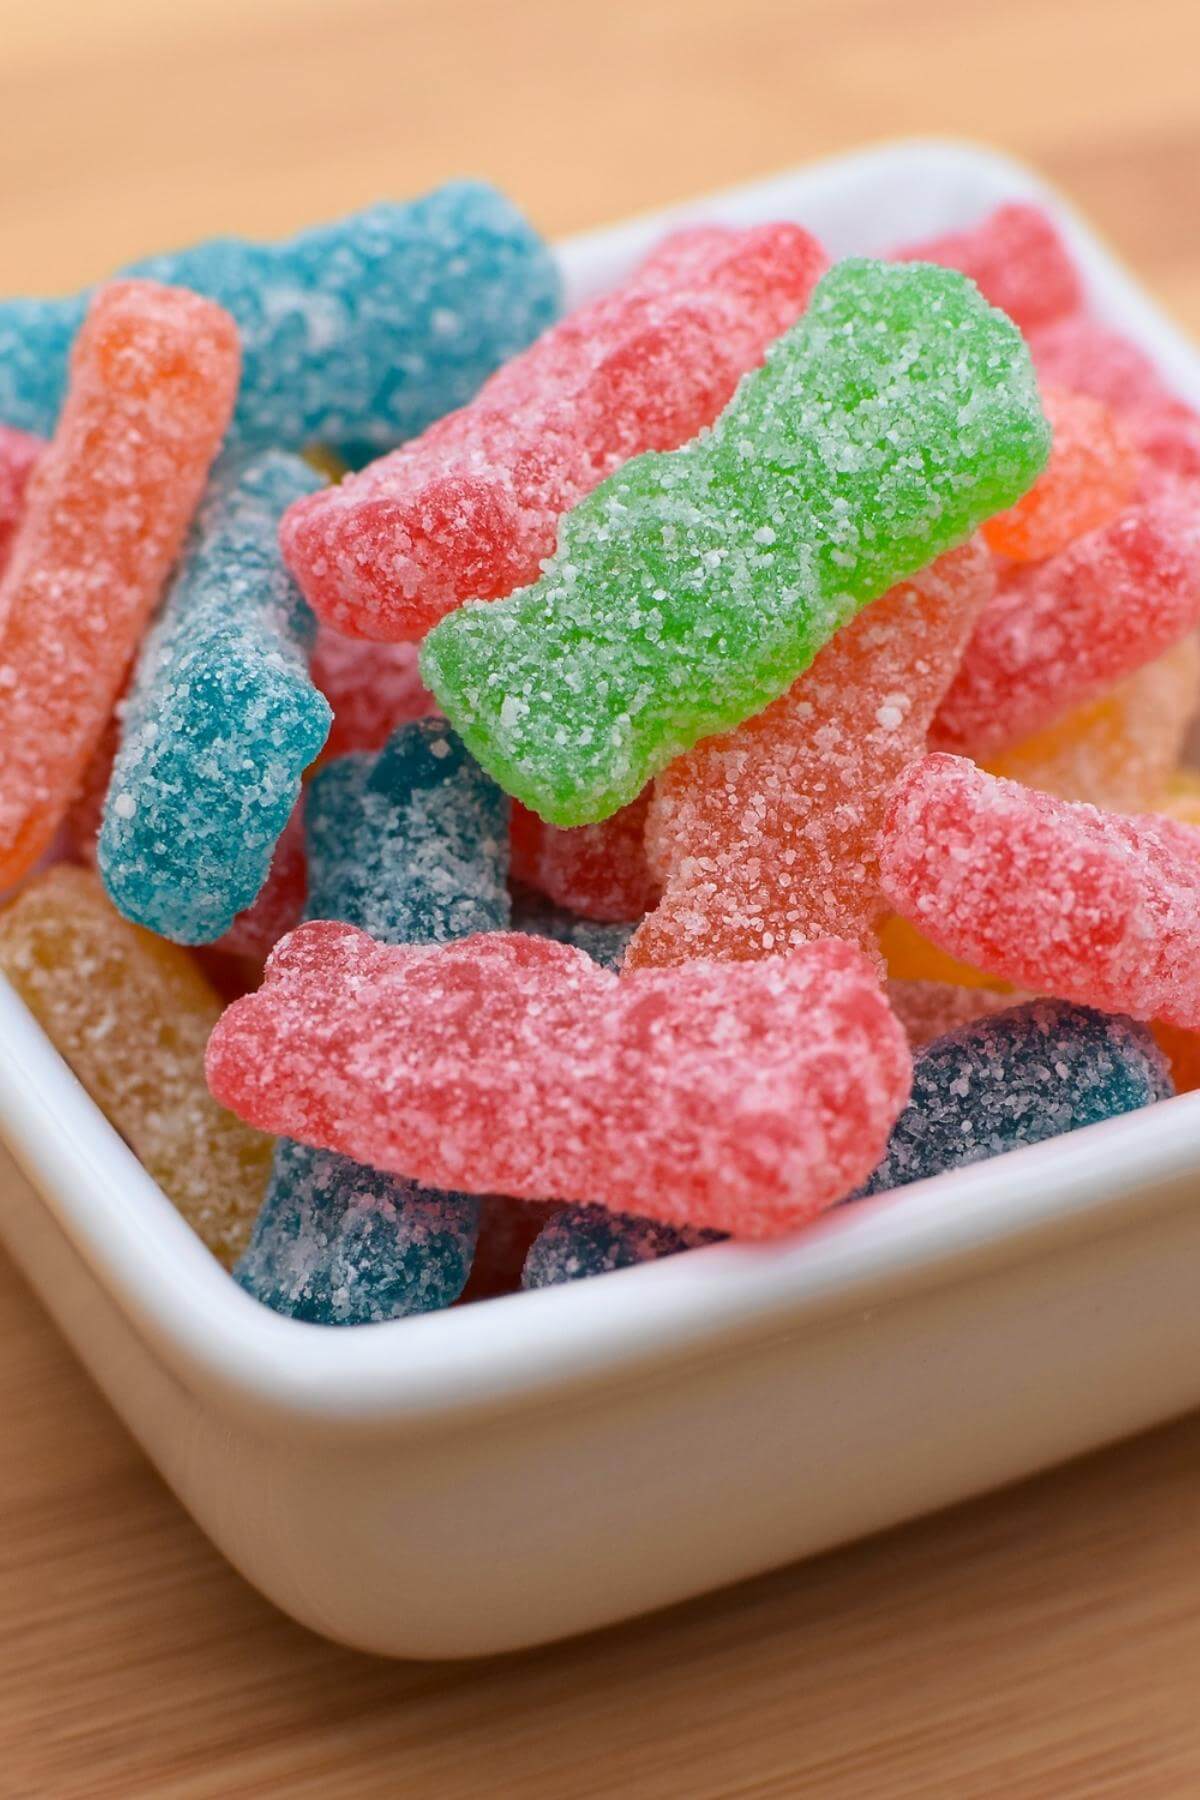 A white square bowl filled with colorful sour patch kids candy.